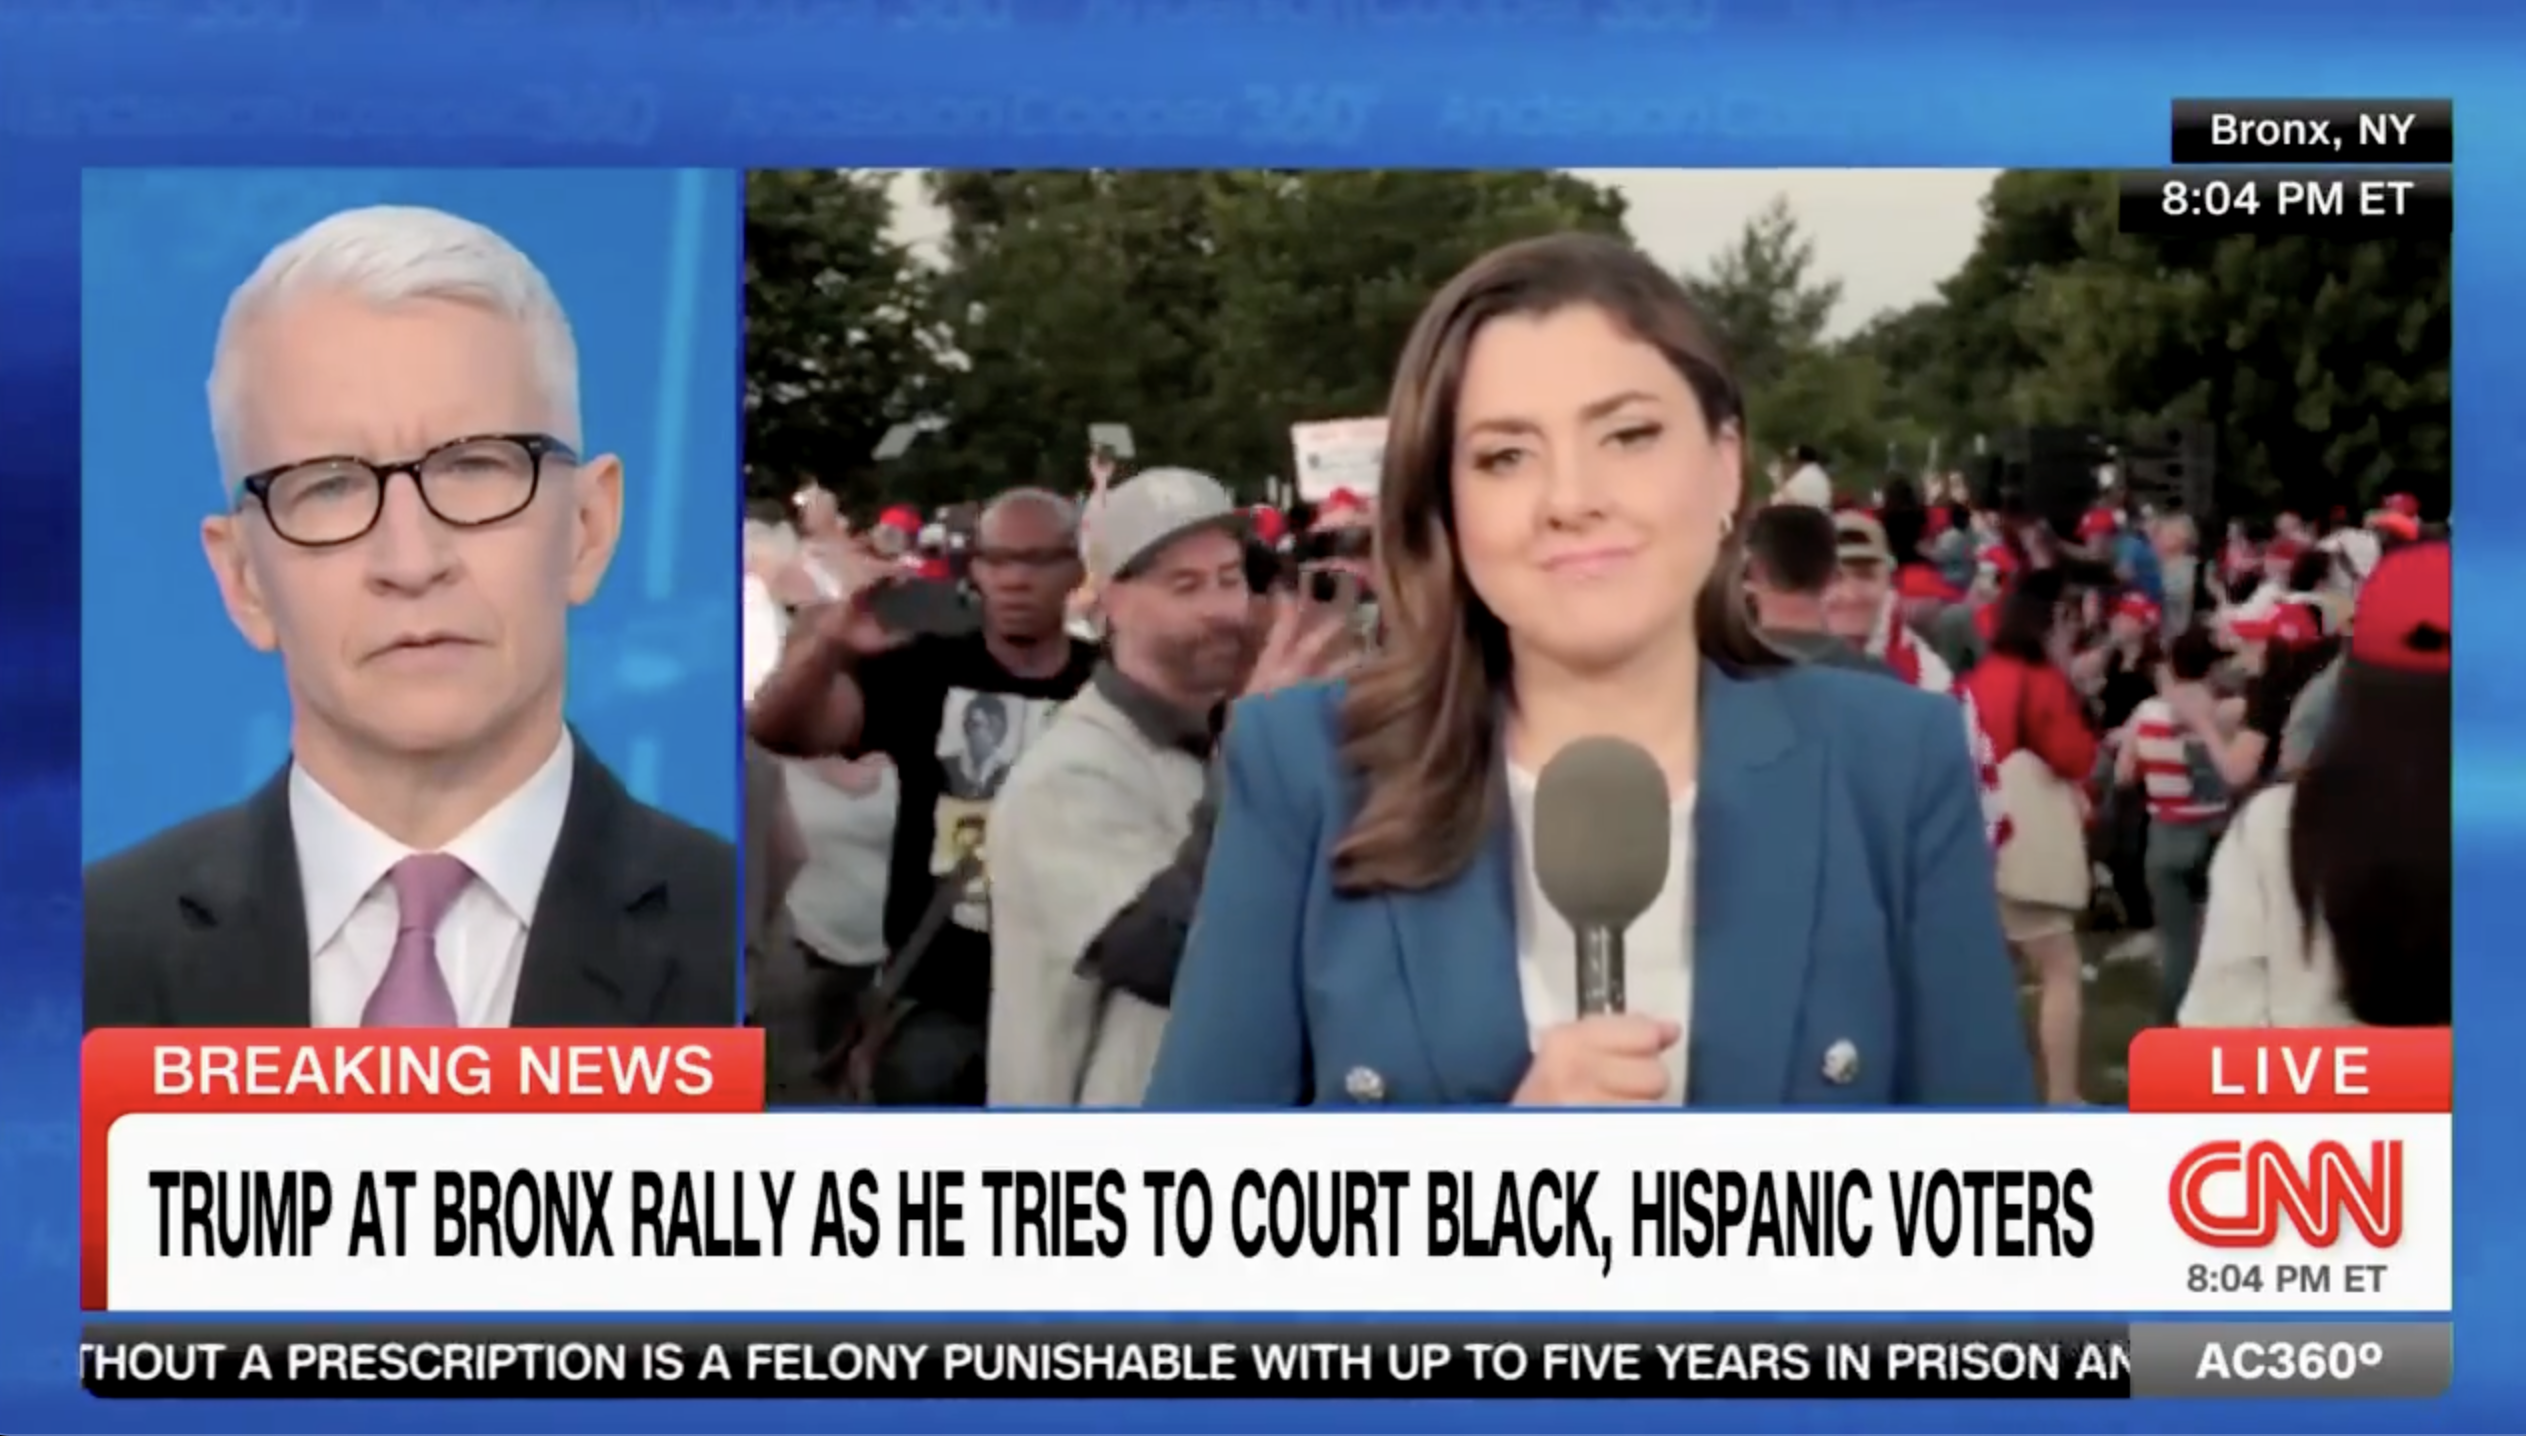 HILARIOUS: Watch CNN Forced To Admit The Trump Bronx Rally Is HUGE and DIVERSE!